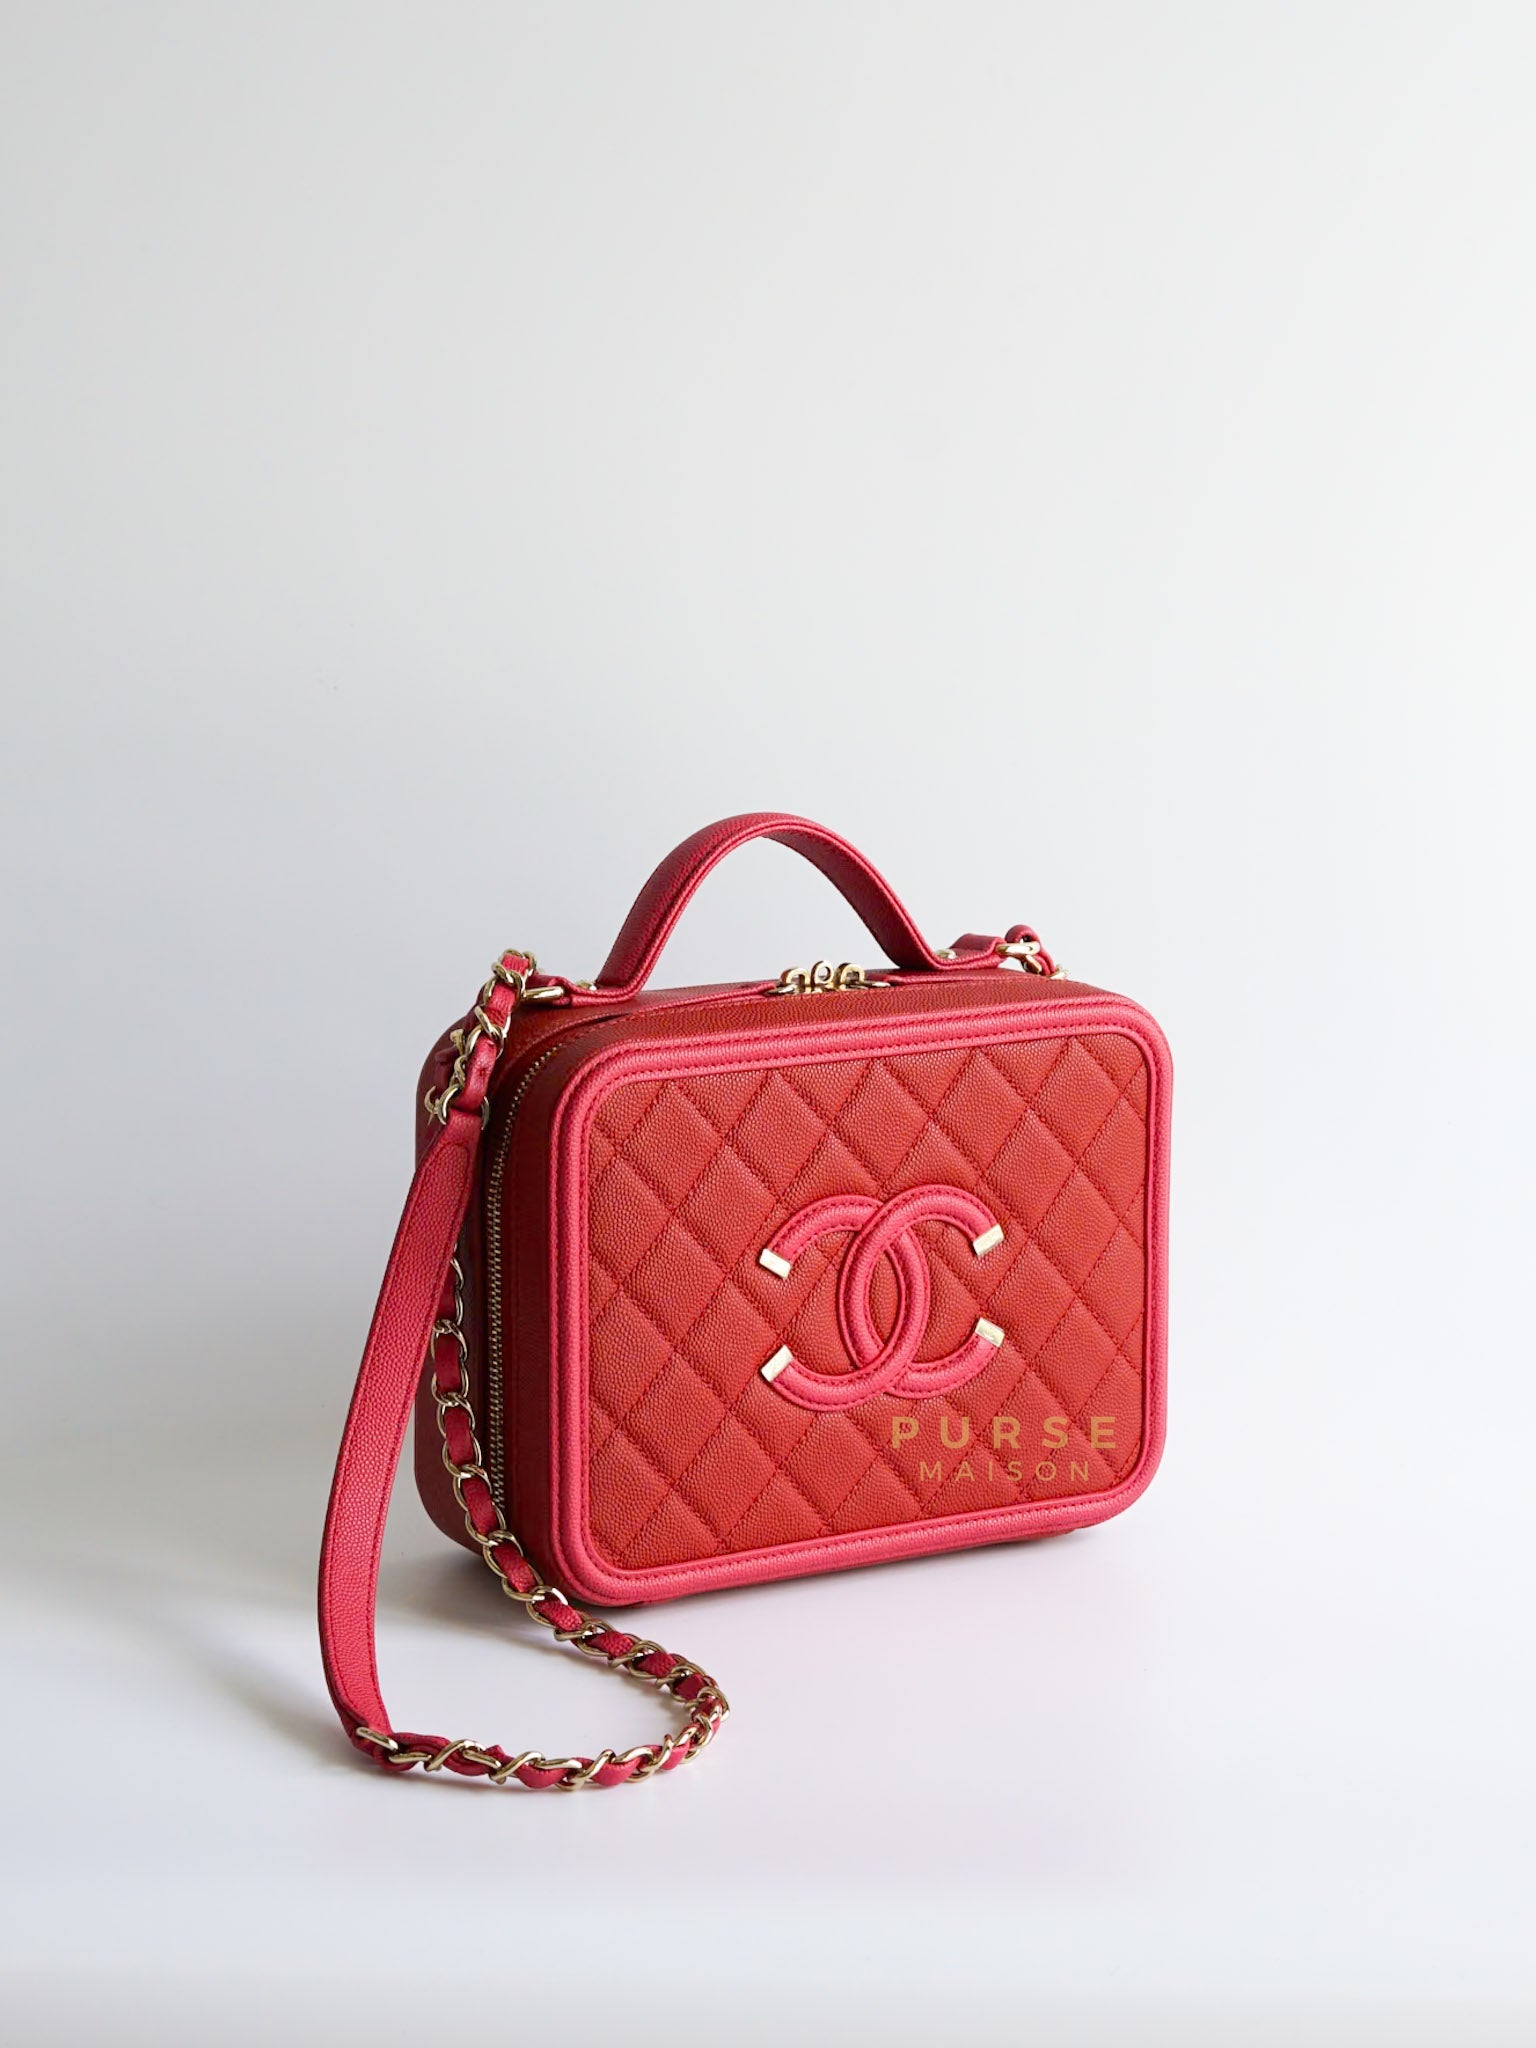 CC Filigree Medium Vanity Bag in Red/Pink Caviar Leather and Gold Hardware Series 29 | Purse Maison Luxury Bags Shop